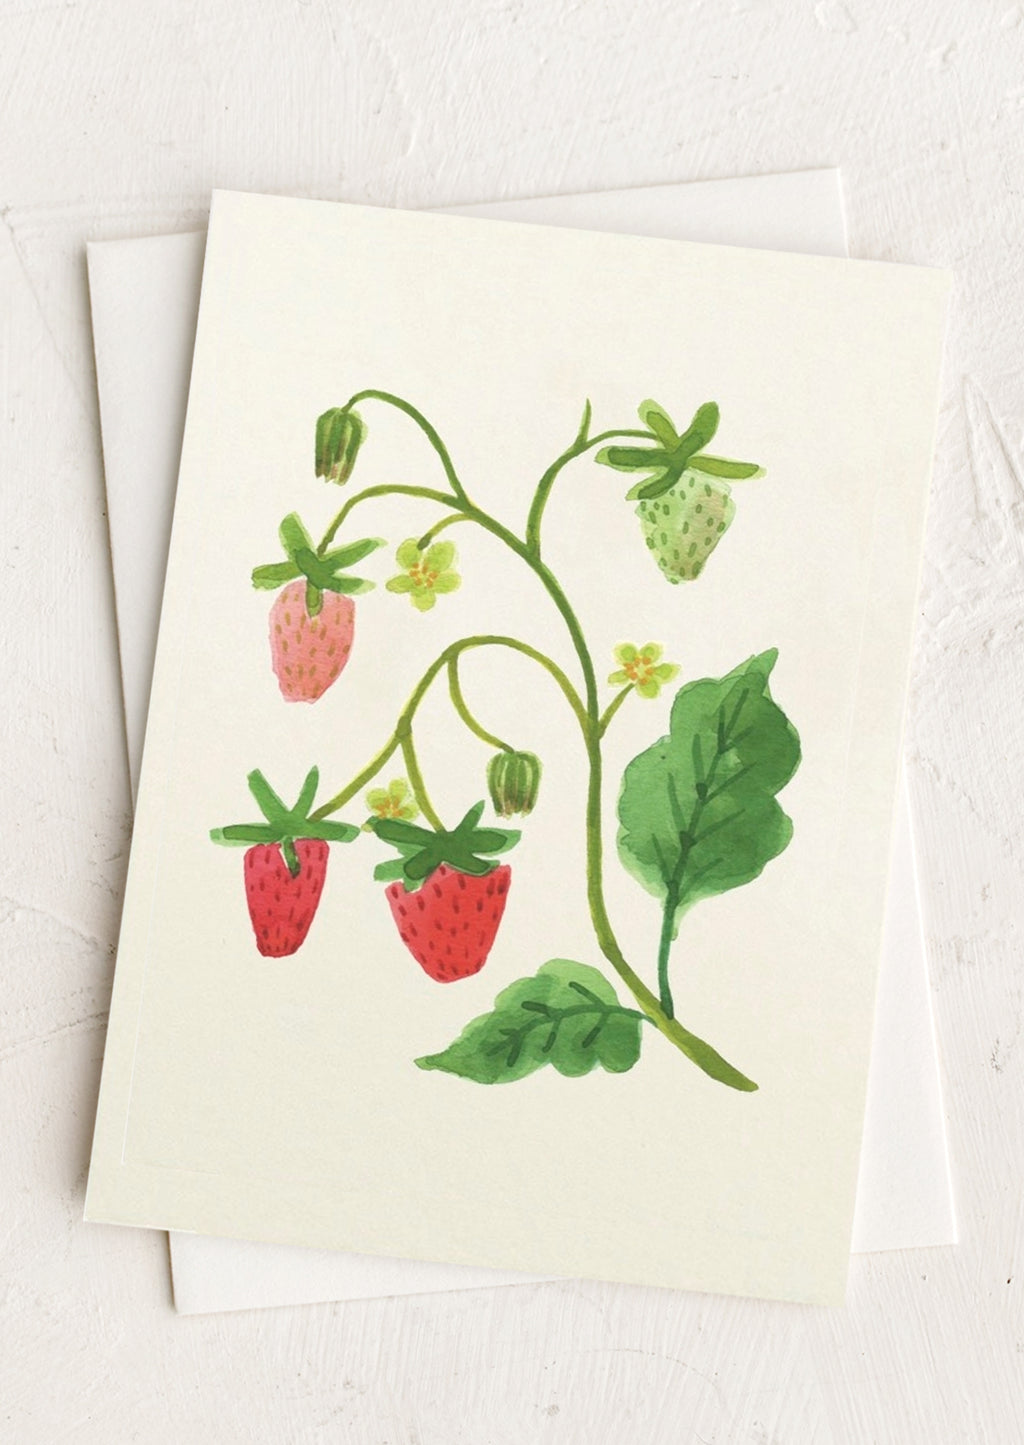 Strawberries: An illustrated card with image of strawberries.